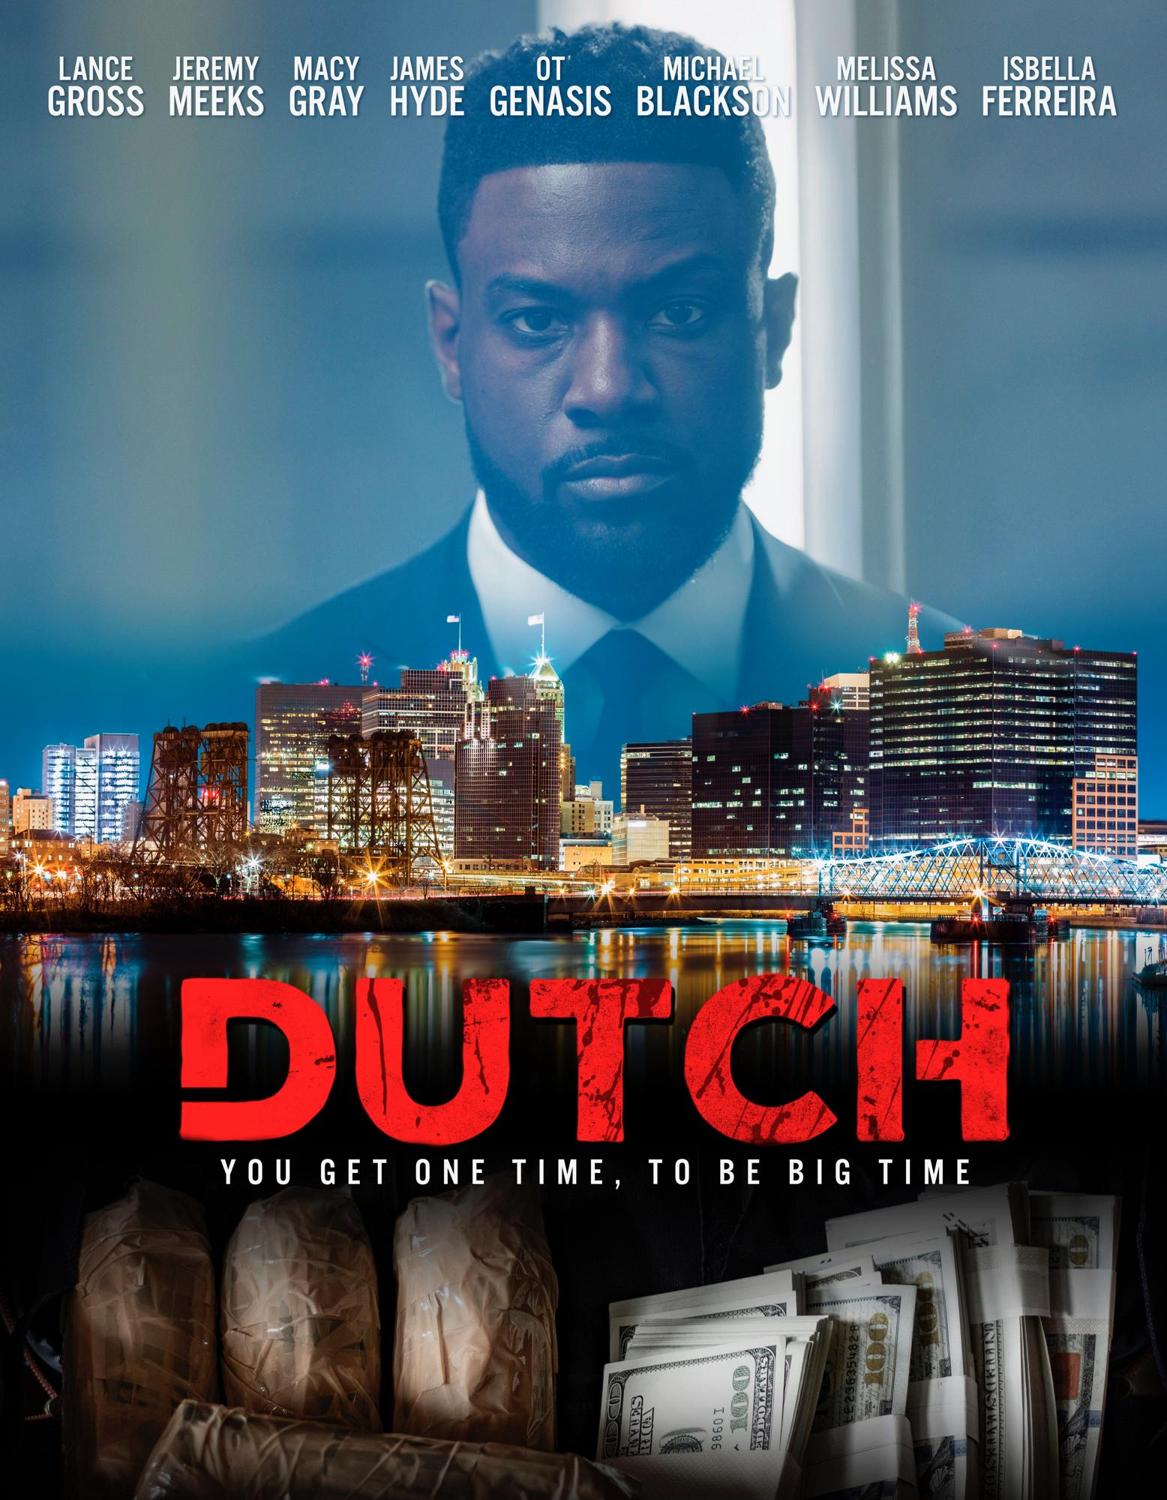 Dutch (2021) Pictures, Photo, Image and Movie Stills